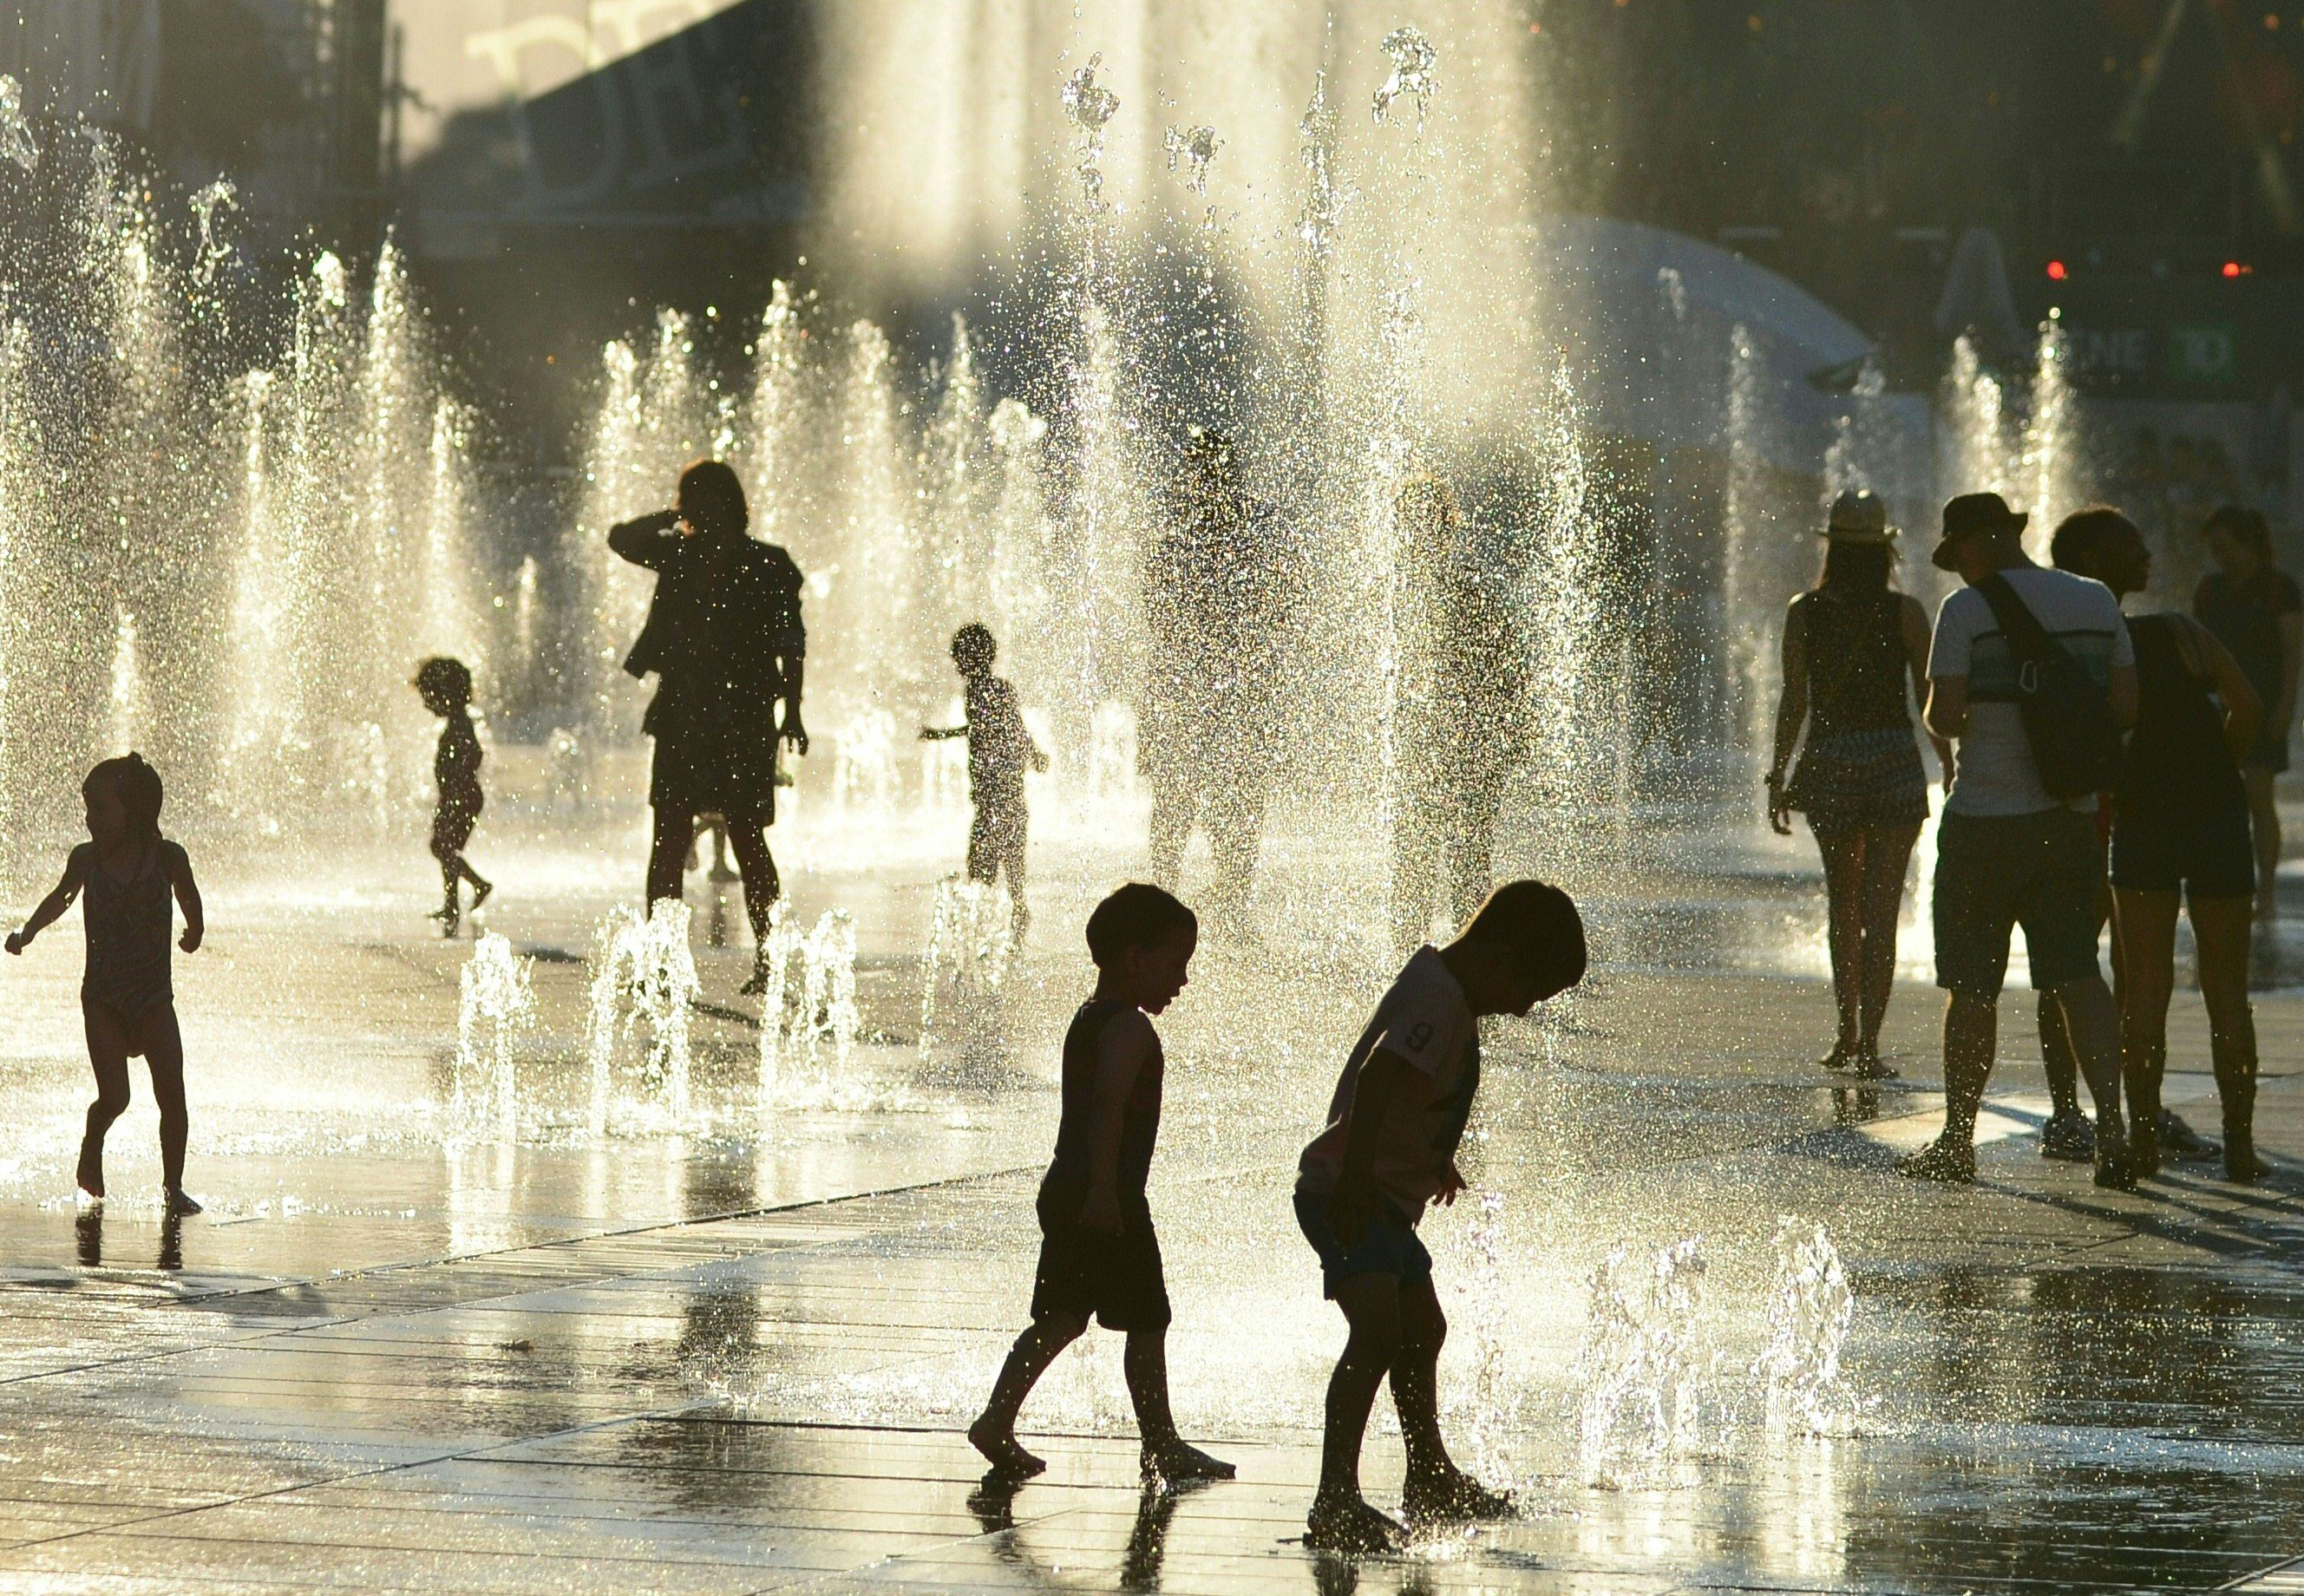 Children play in the water fountains at the Place des Arts in Montreal, Canada on a hot summer day July 3, 2018. (Eva Hambach—AFP/Getty Images)